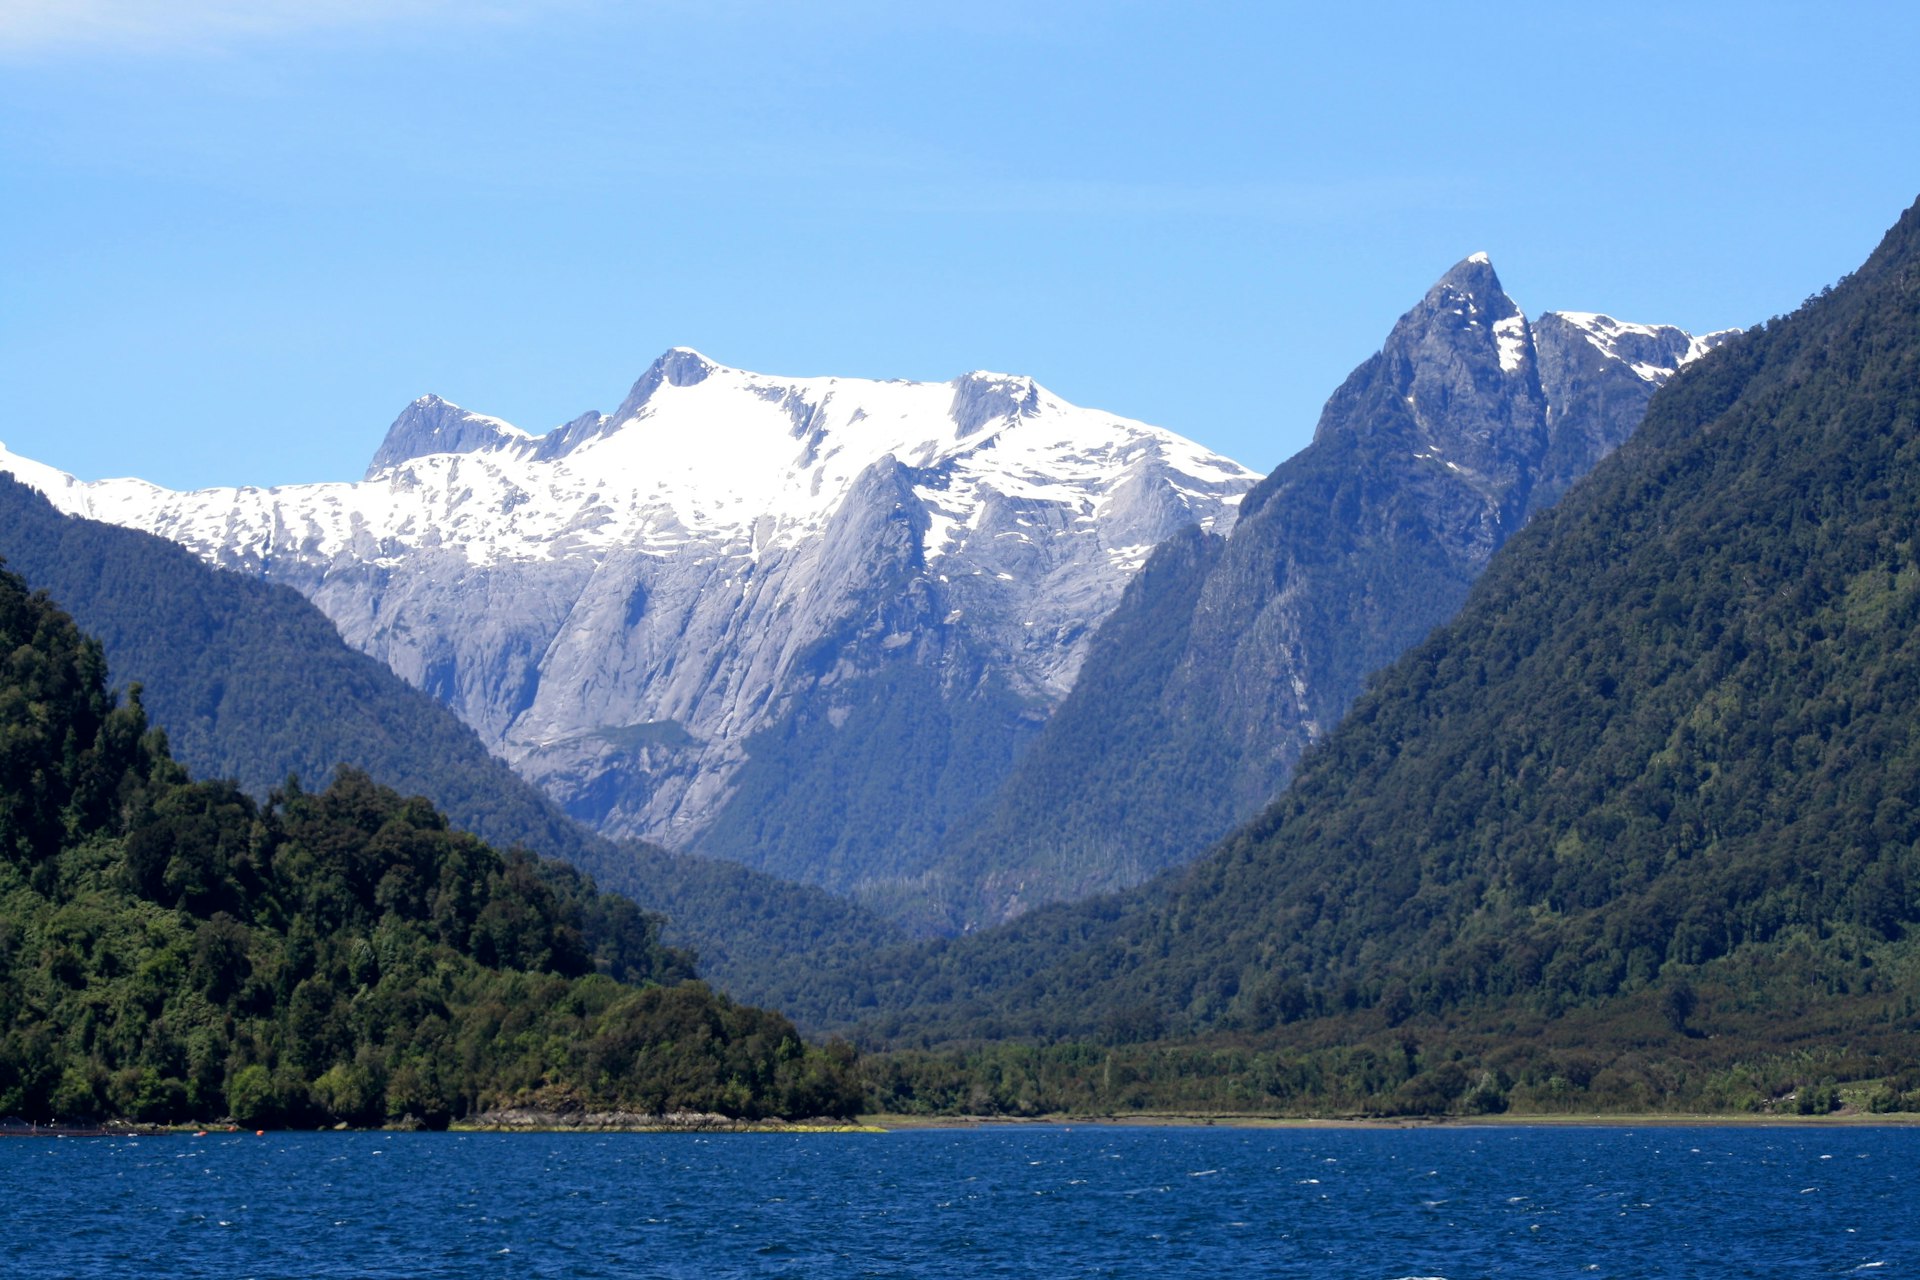 The Andes as seen from the Bimodal Ferry route to Caleta Gonzalo © Carolyn McCarthy